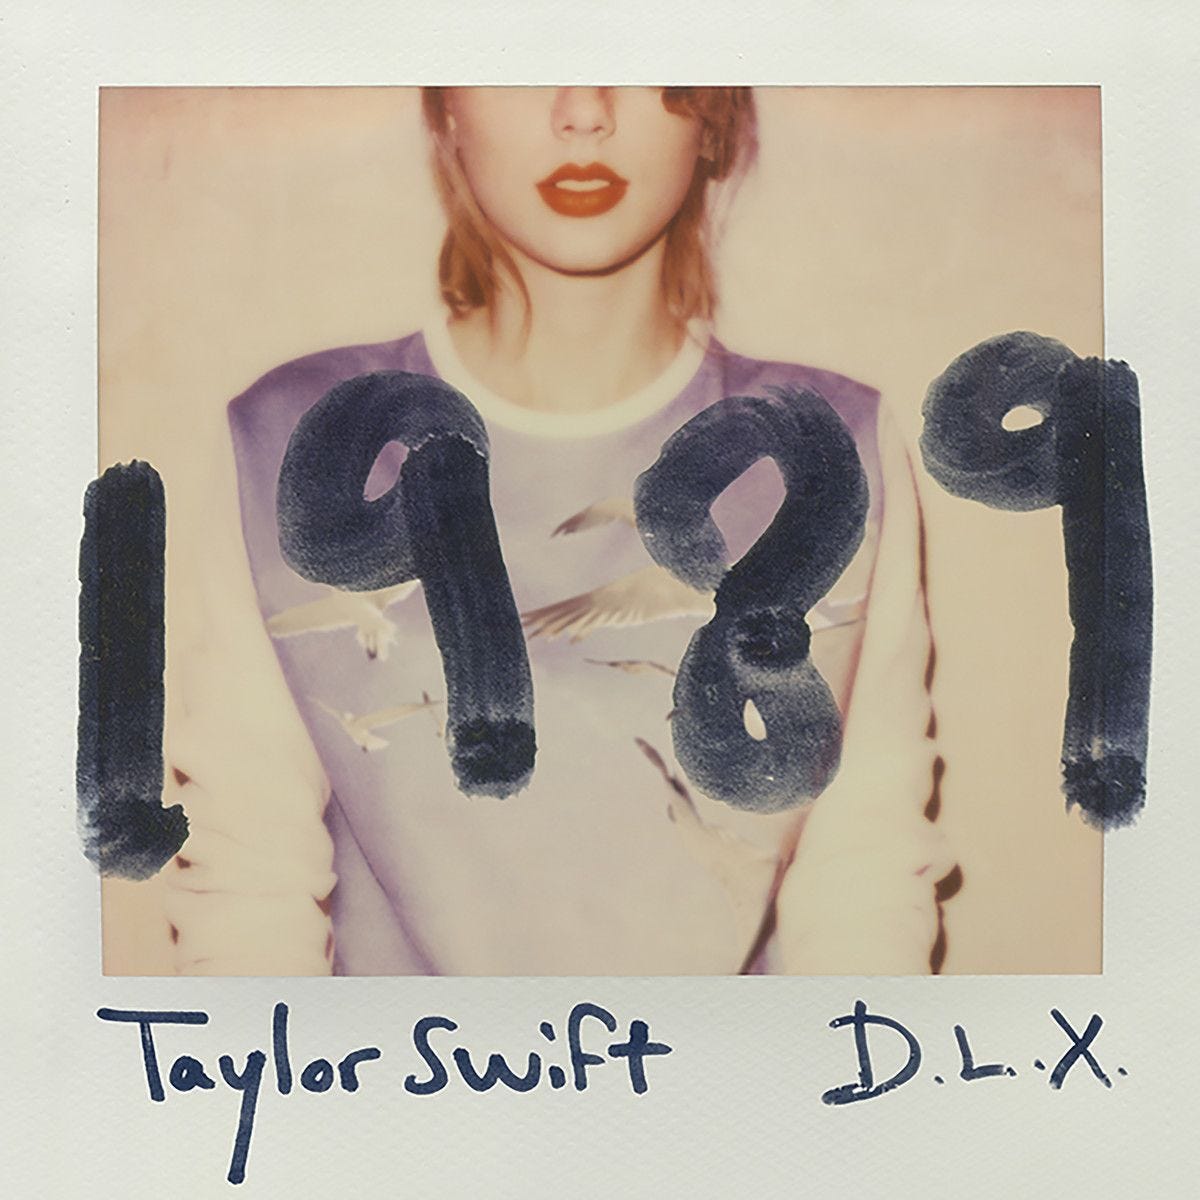 Album "1989" by Taylor Swift including the track "Blank Space"